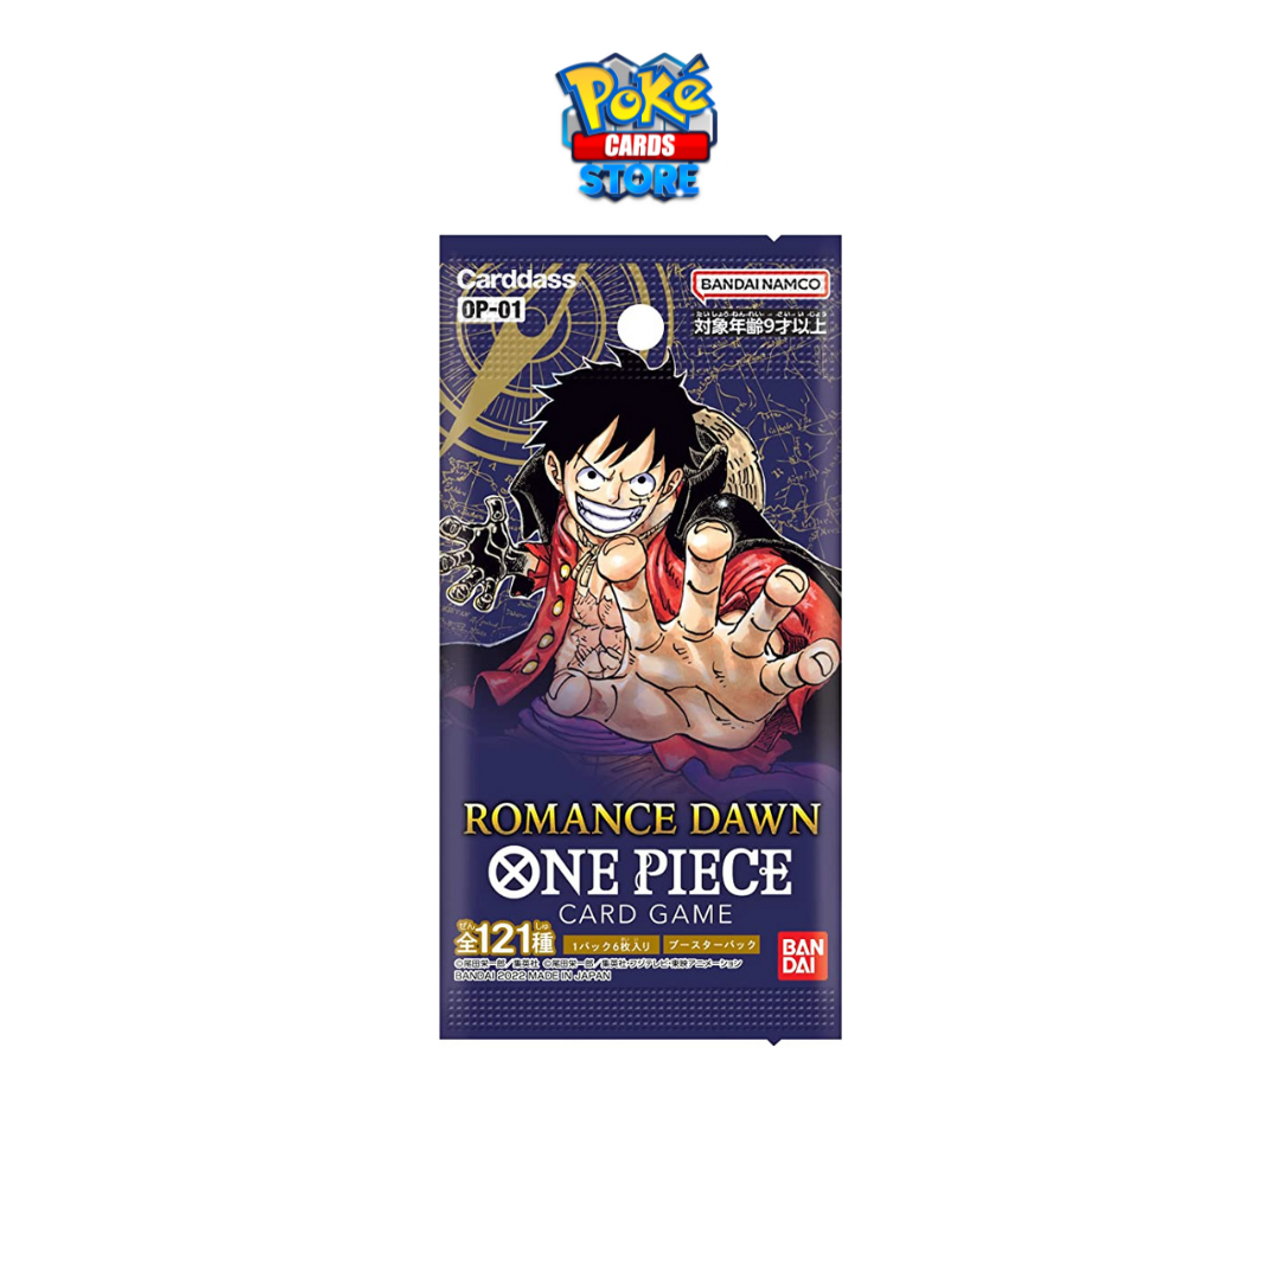 One Piece Card Game Booster Pack Romance Dawn - OP-01 - JAP